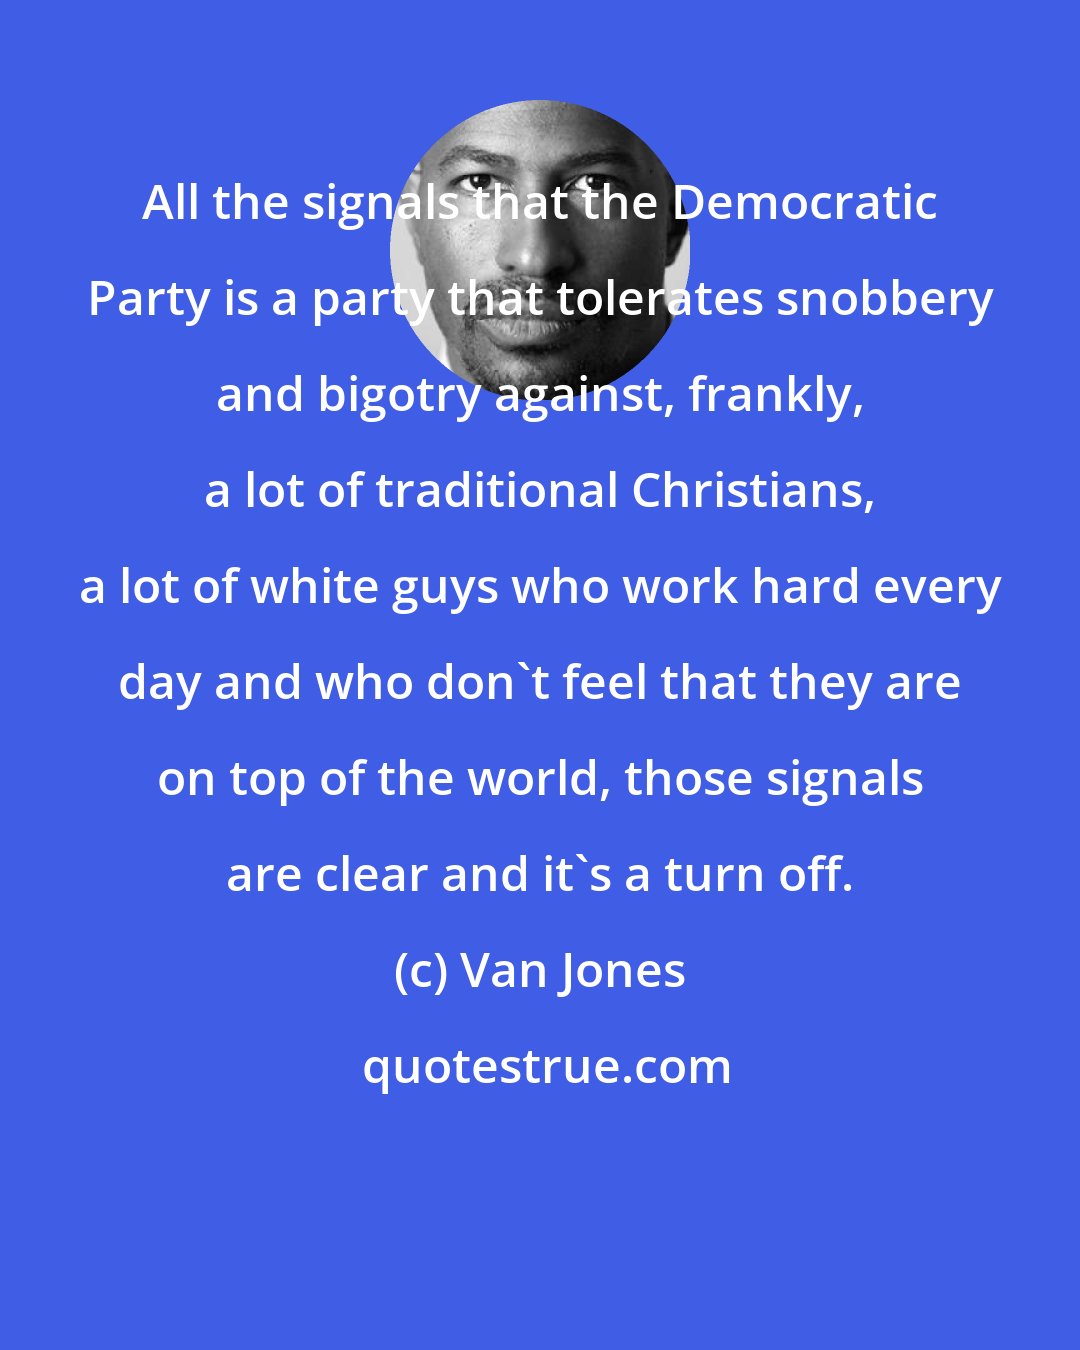 Van Jones: All the signals that the Democratic Party is a party that tolerates snobbery and bigotry against, frankly, a lot of traditional Christians, a lot of white guys who work hard every day and who don't feel that they are on top of the world, those signals are clear and it's a turn off.